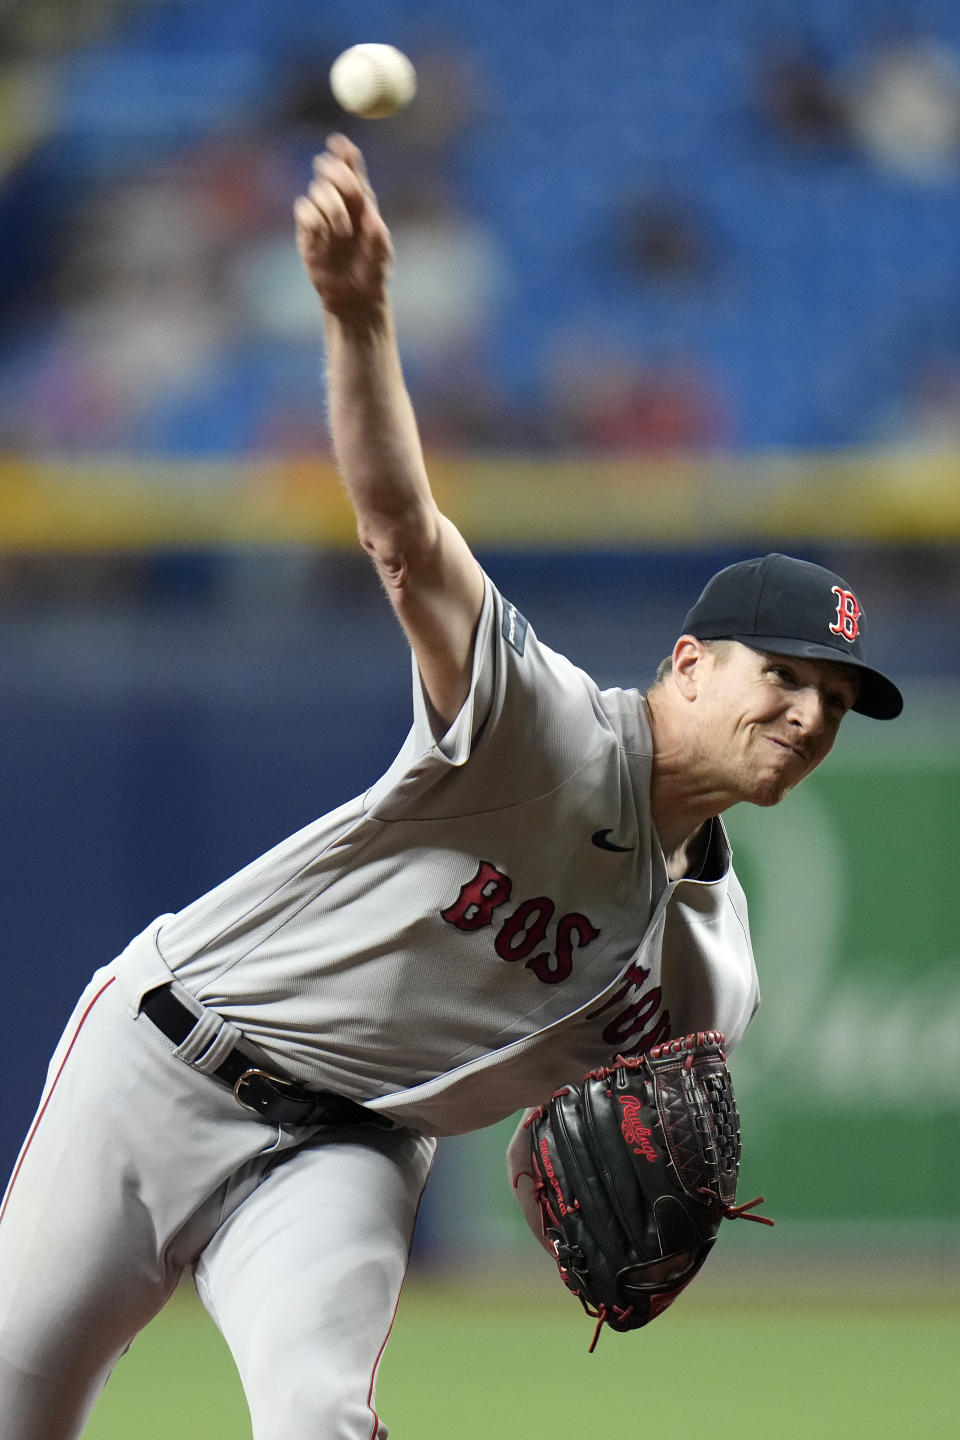 Boston Red Sox's Nick Pivetta pitches to the Tampa Bay Rays during the first inning of a baseball game Wednesday, Sept. 6, 2023, in St. Petersburg, Fla. (AP Photo/Chris O'Meara)